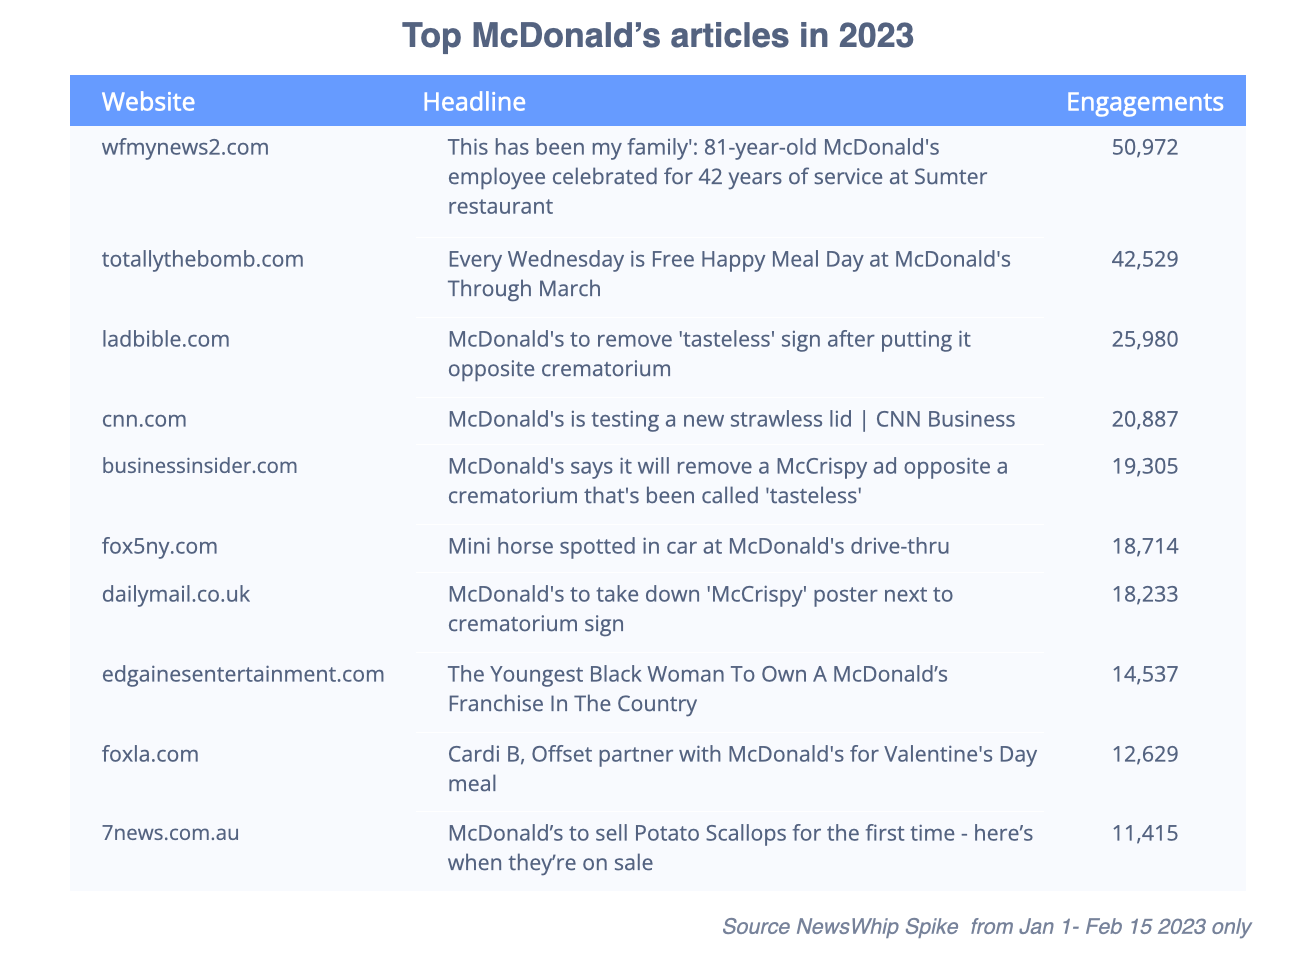 Chart showing the top ten articles about McDonald's in 2023, ranked by engagement